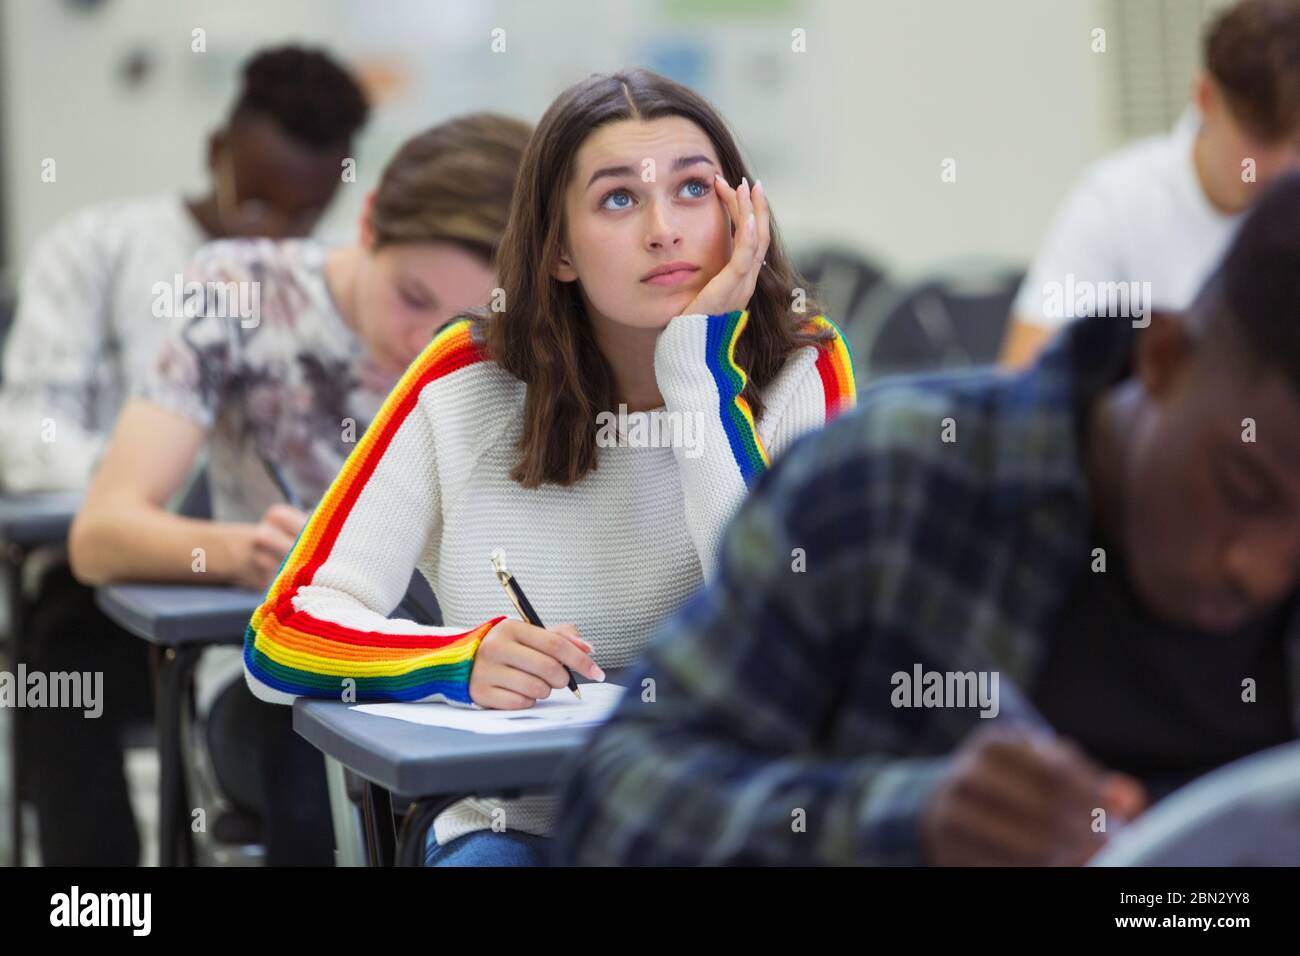 Focused high school girl student taking exam looking up Stock Photo